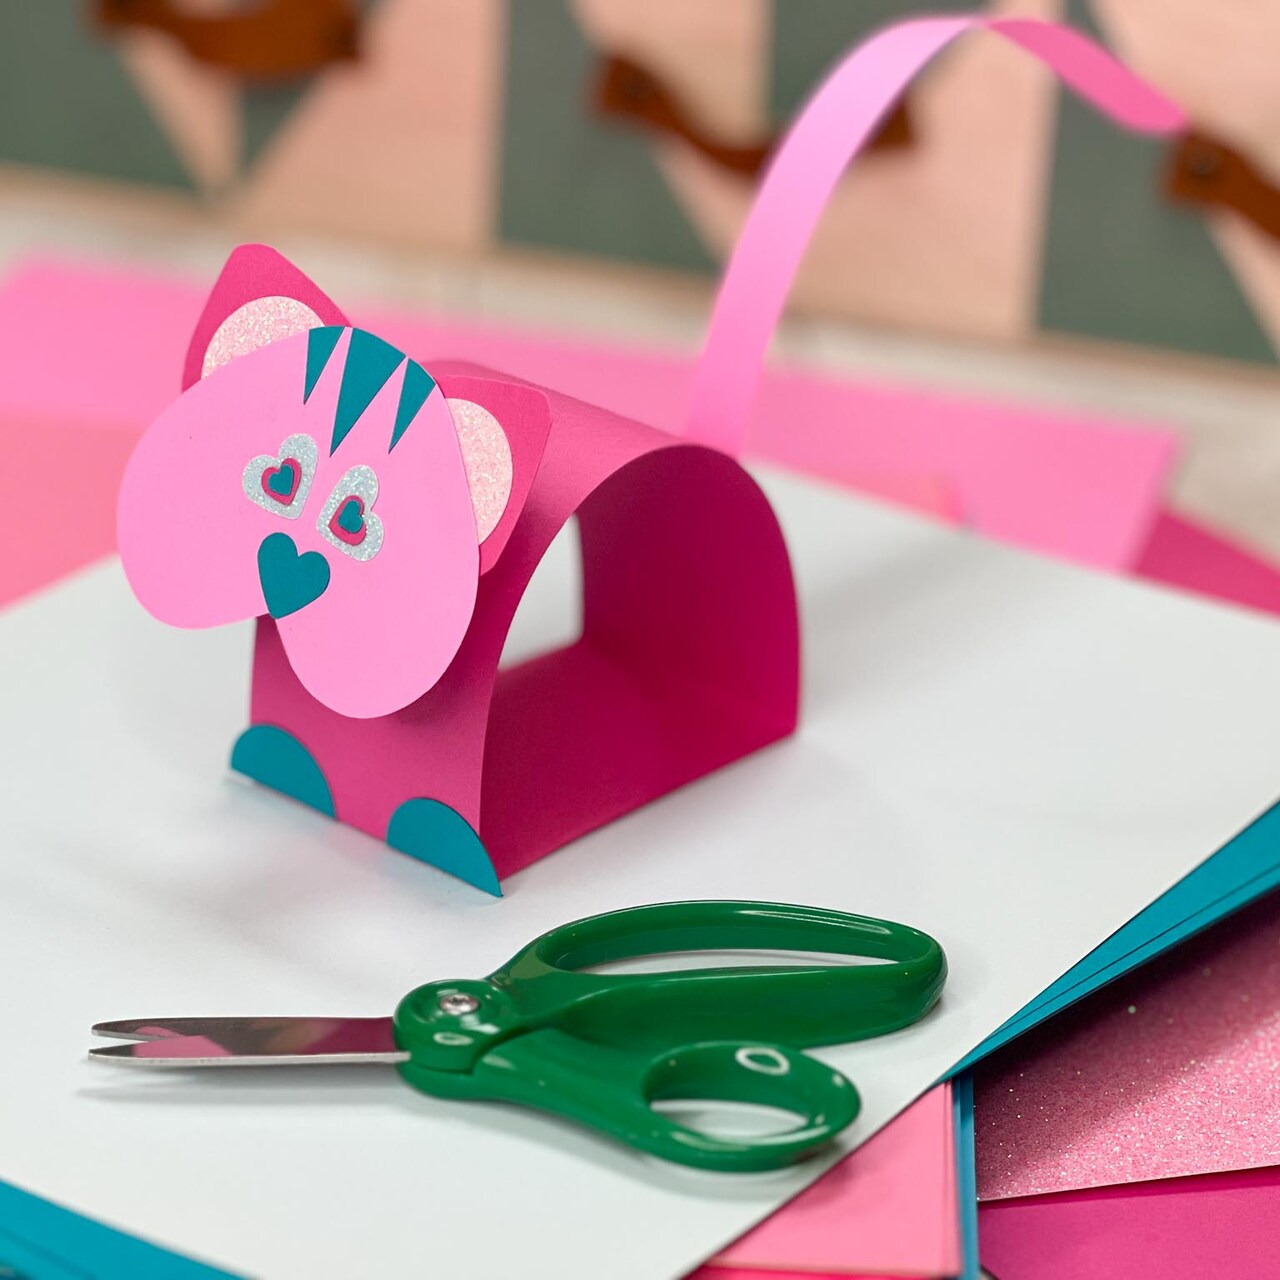 Family Craft Night: DIY Paper Kitty Cat for Valentine's Day ~ How To Make A 3-D Paper Cat